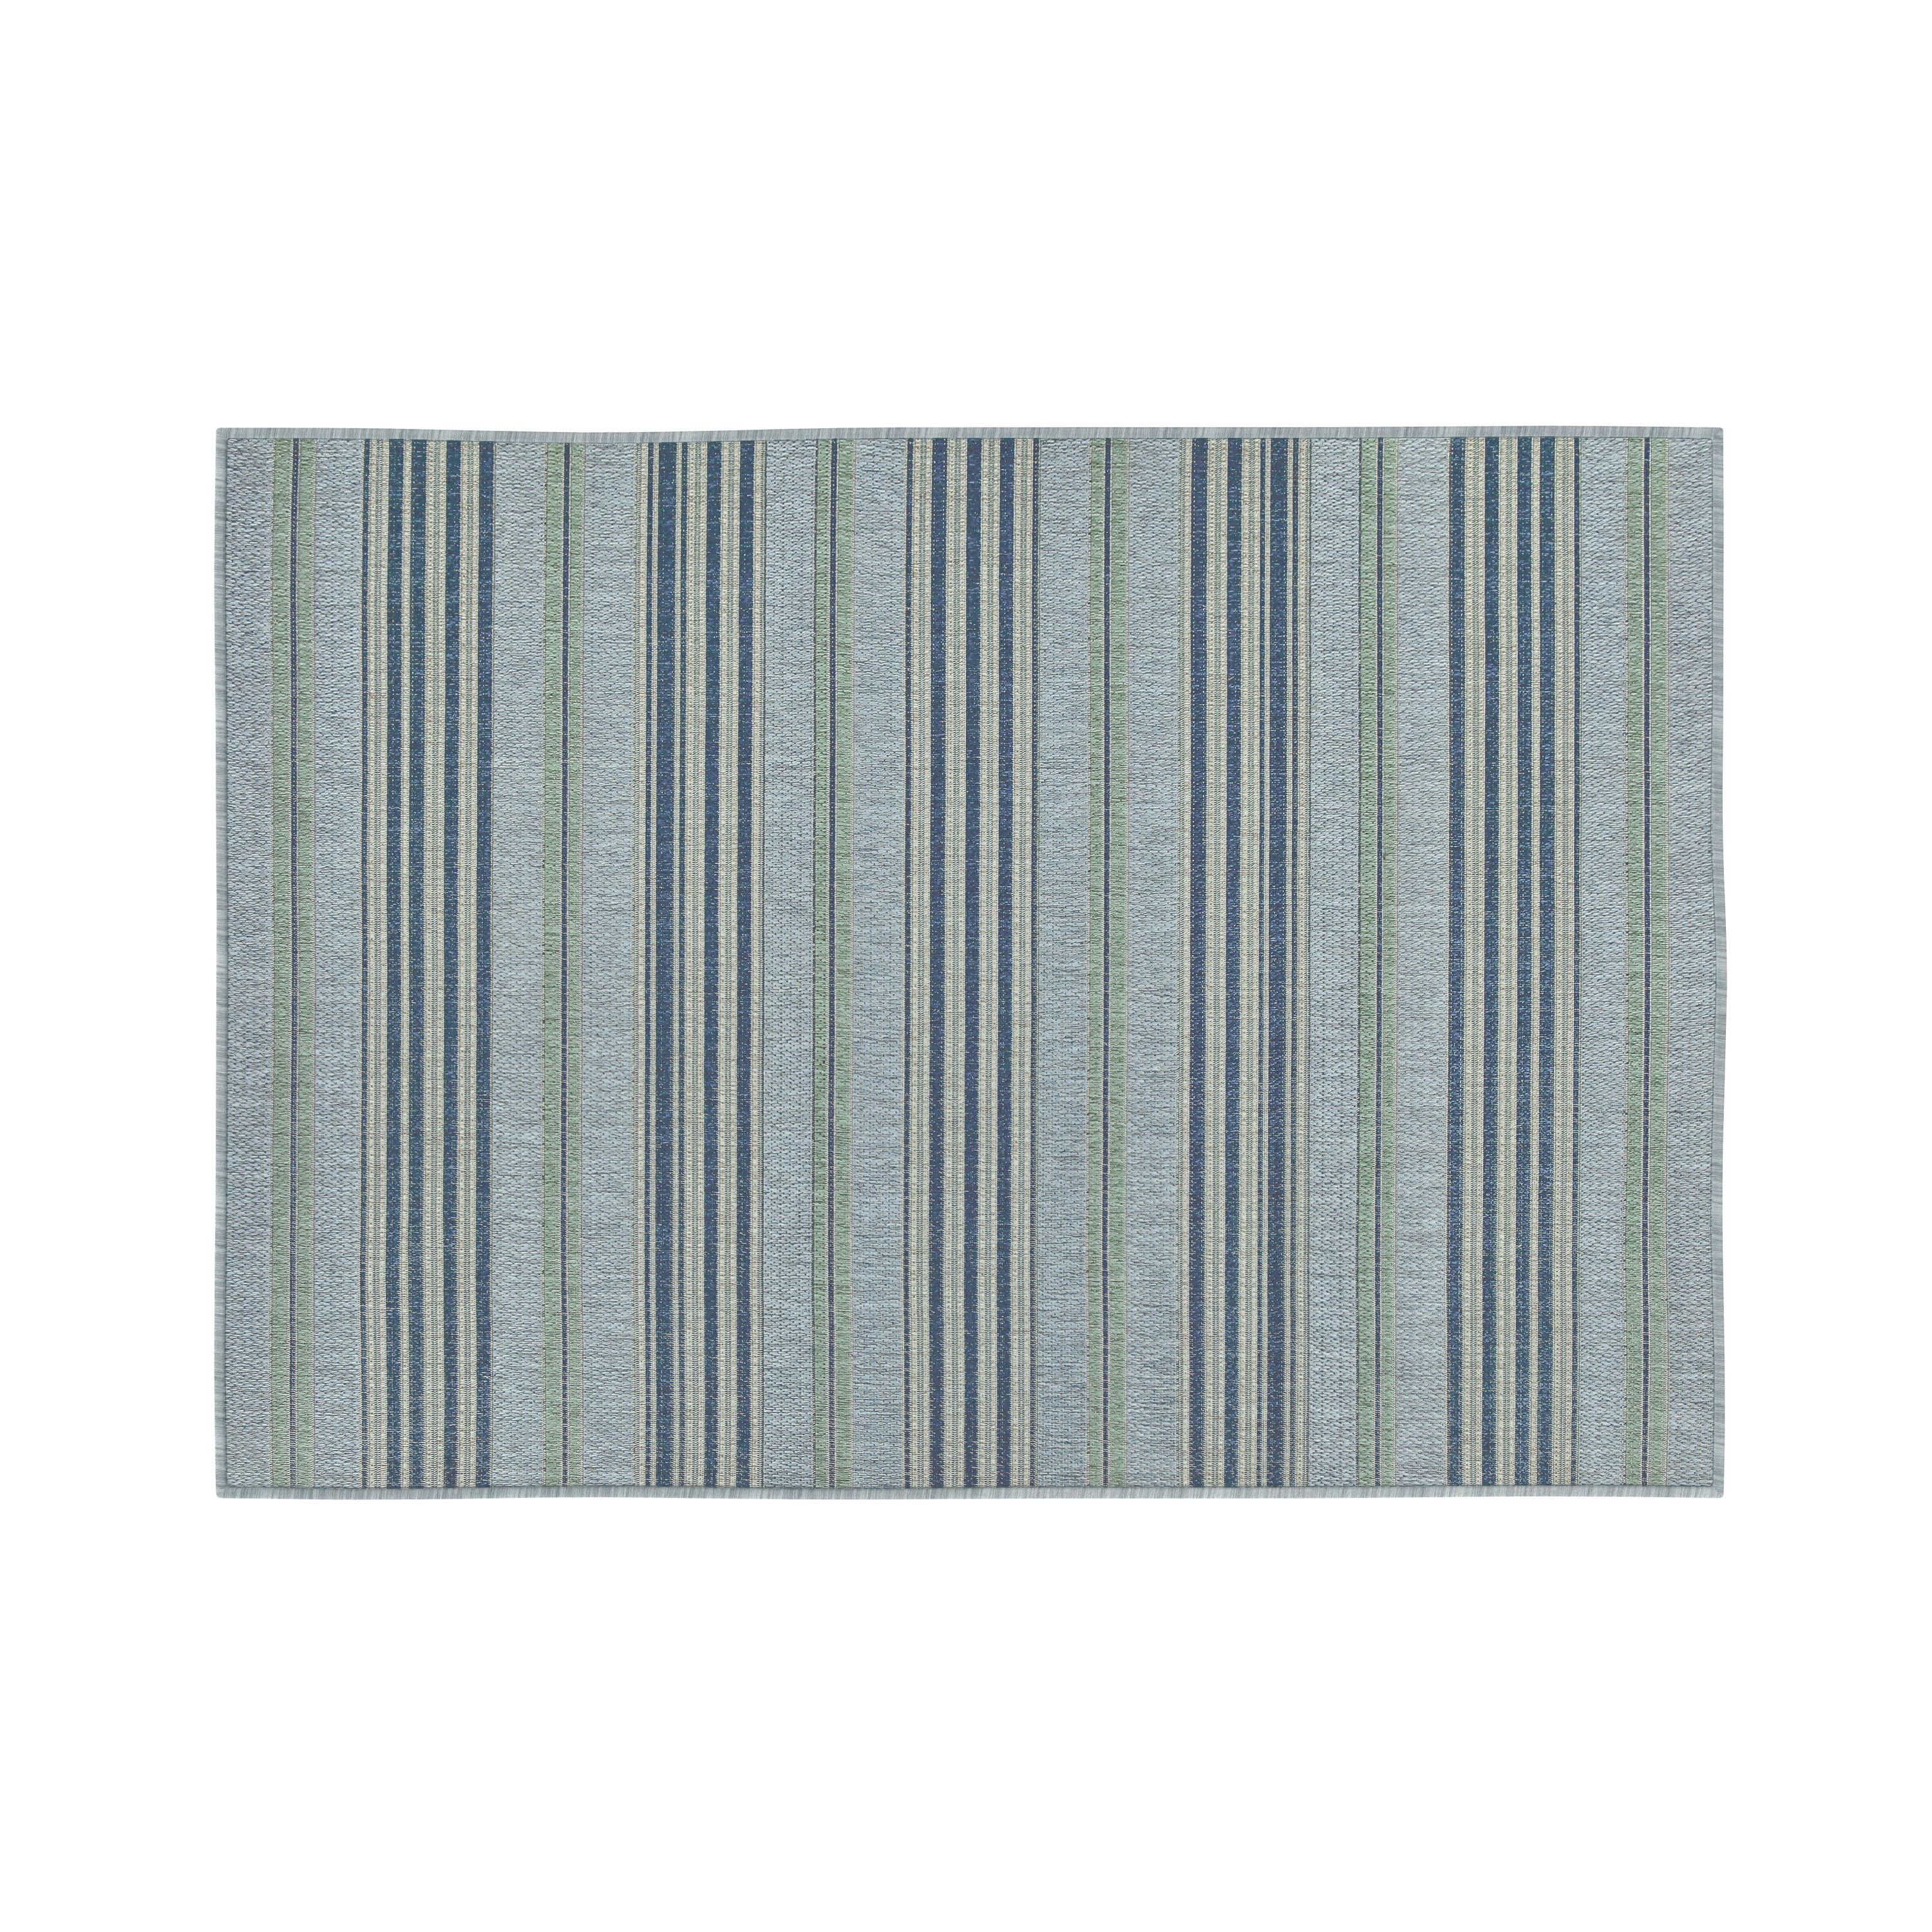 Allen Roth 5 X 7 Blue Outdoor Stripe, Blue And Green Outdoor Rug